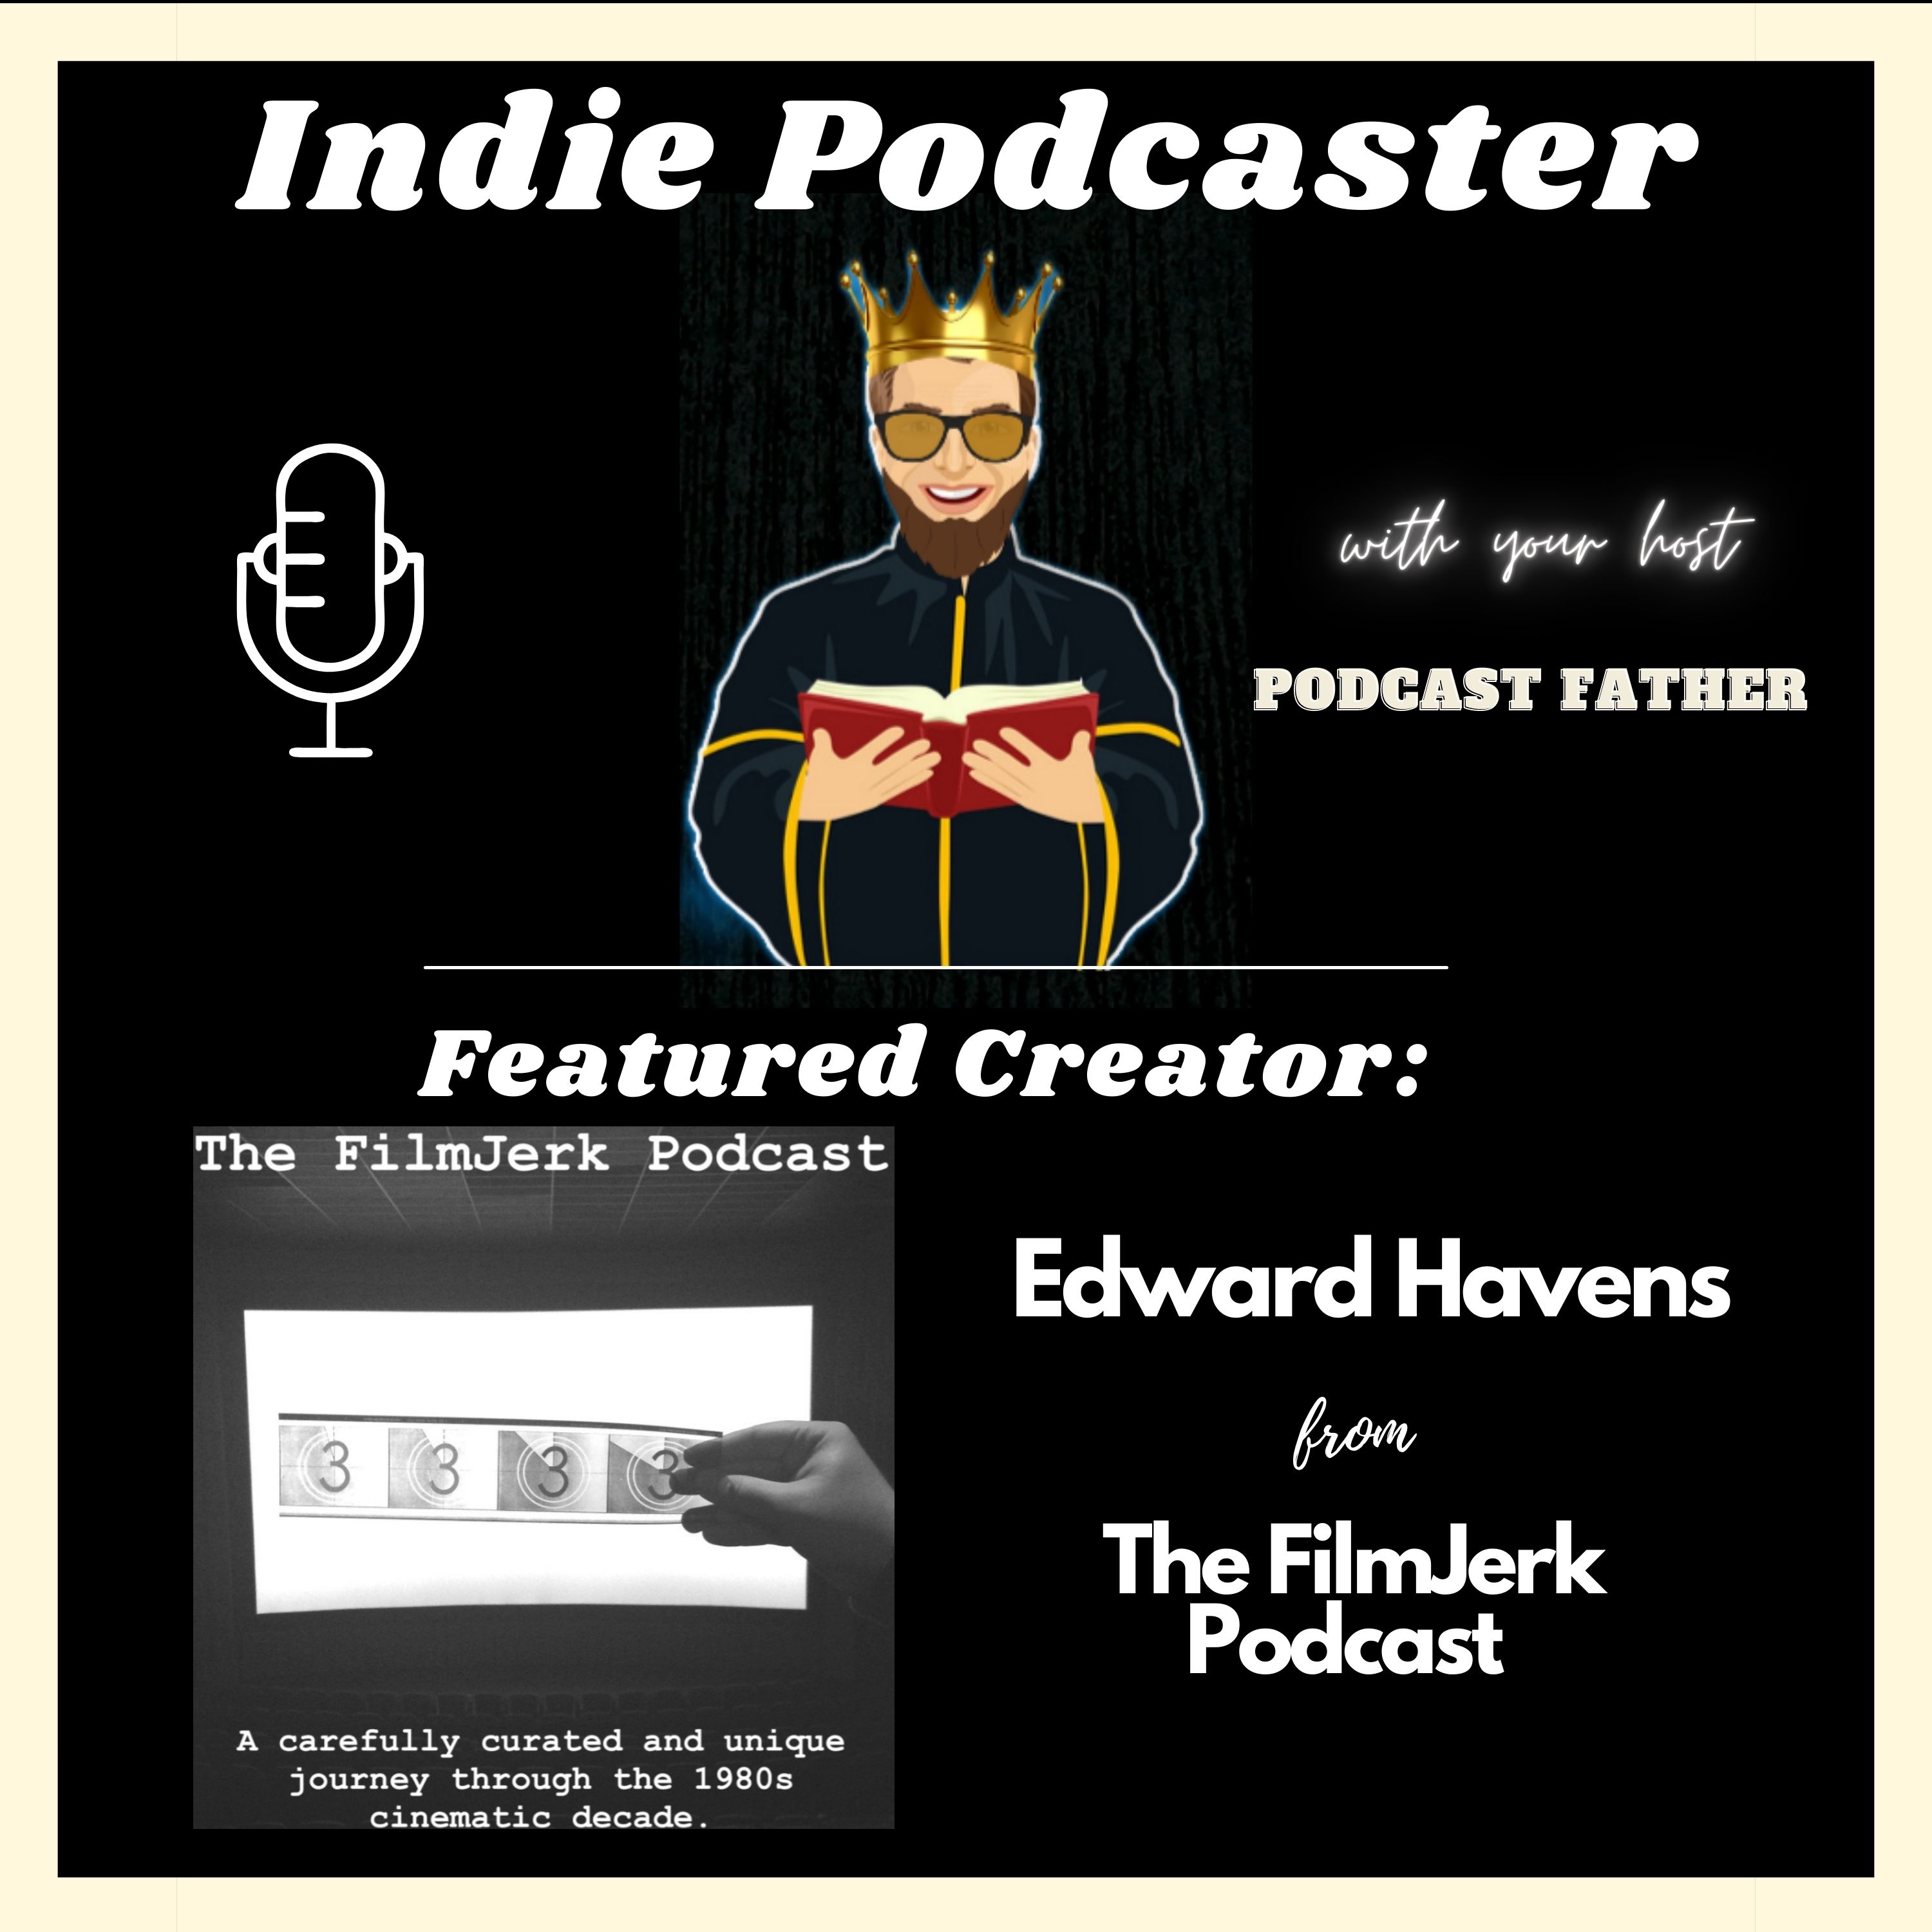 Edward Havens from The FilmJerk Podcast Image